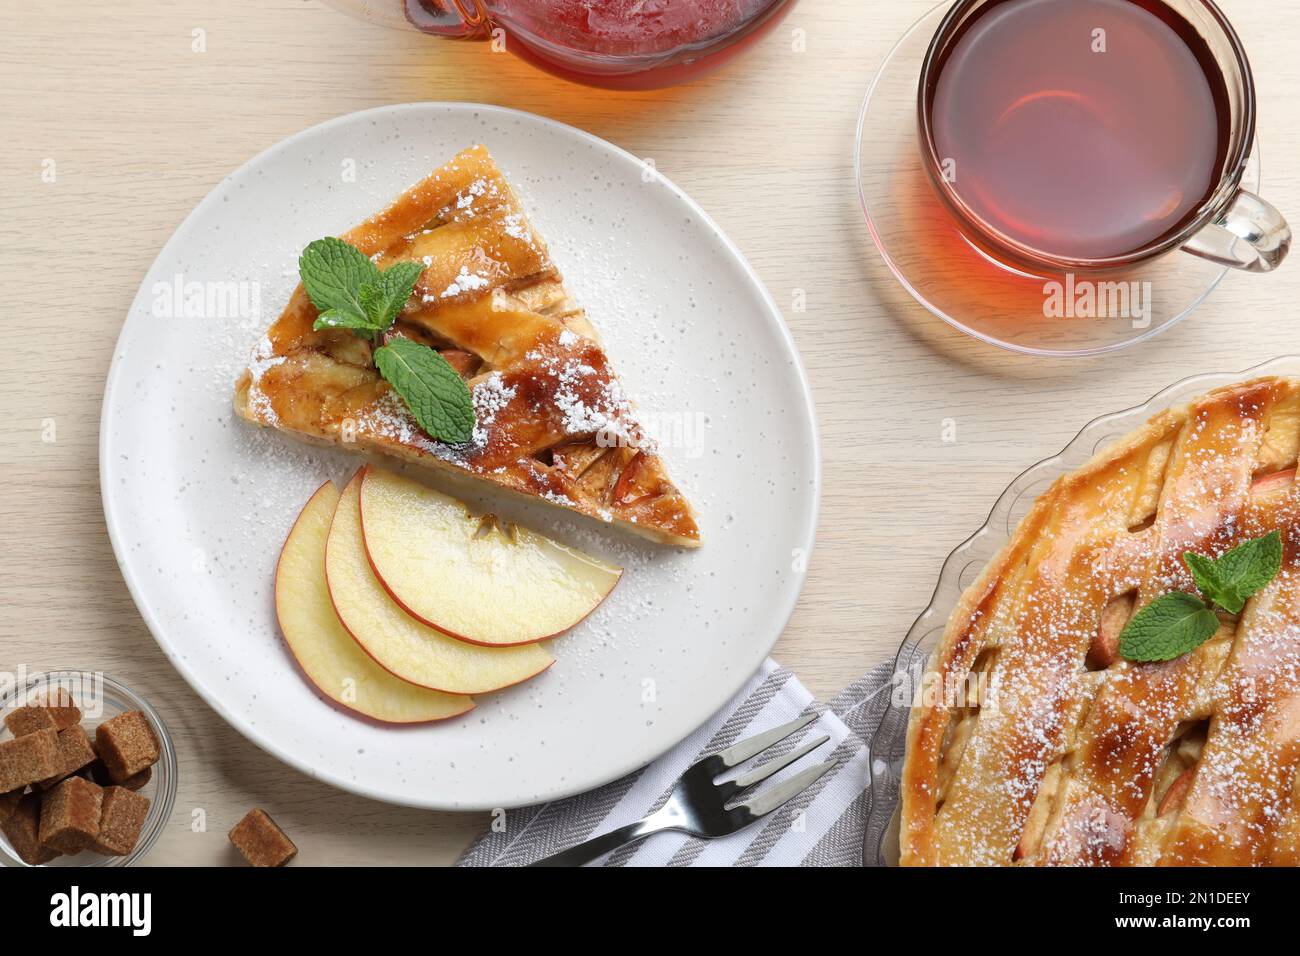 Slice of traditional apple pie served on wooden table, flat lay Stock Photo